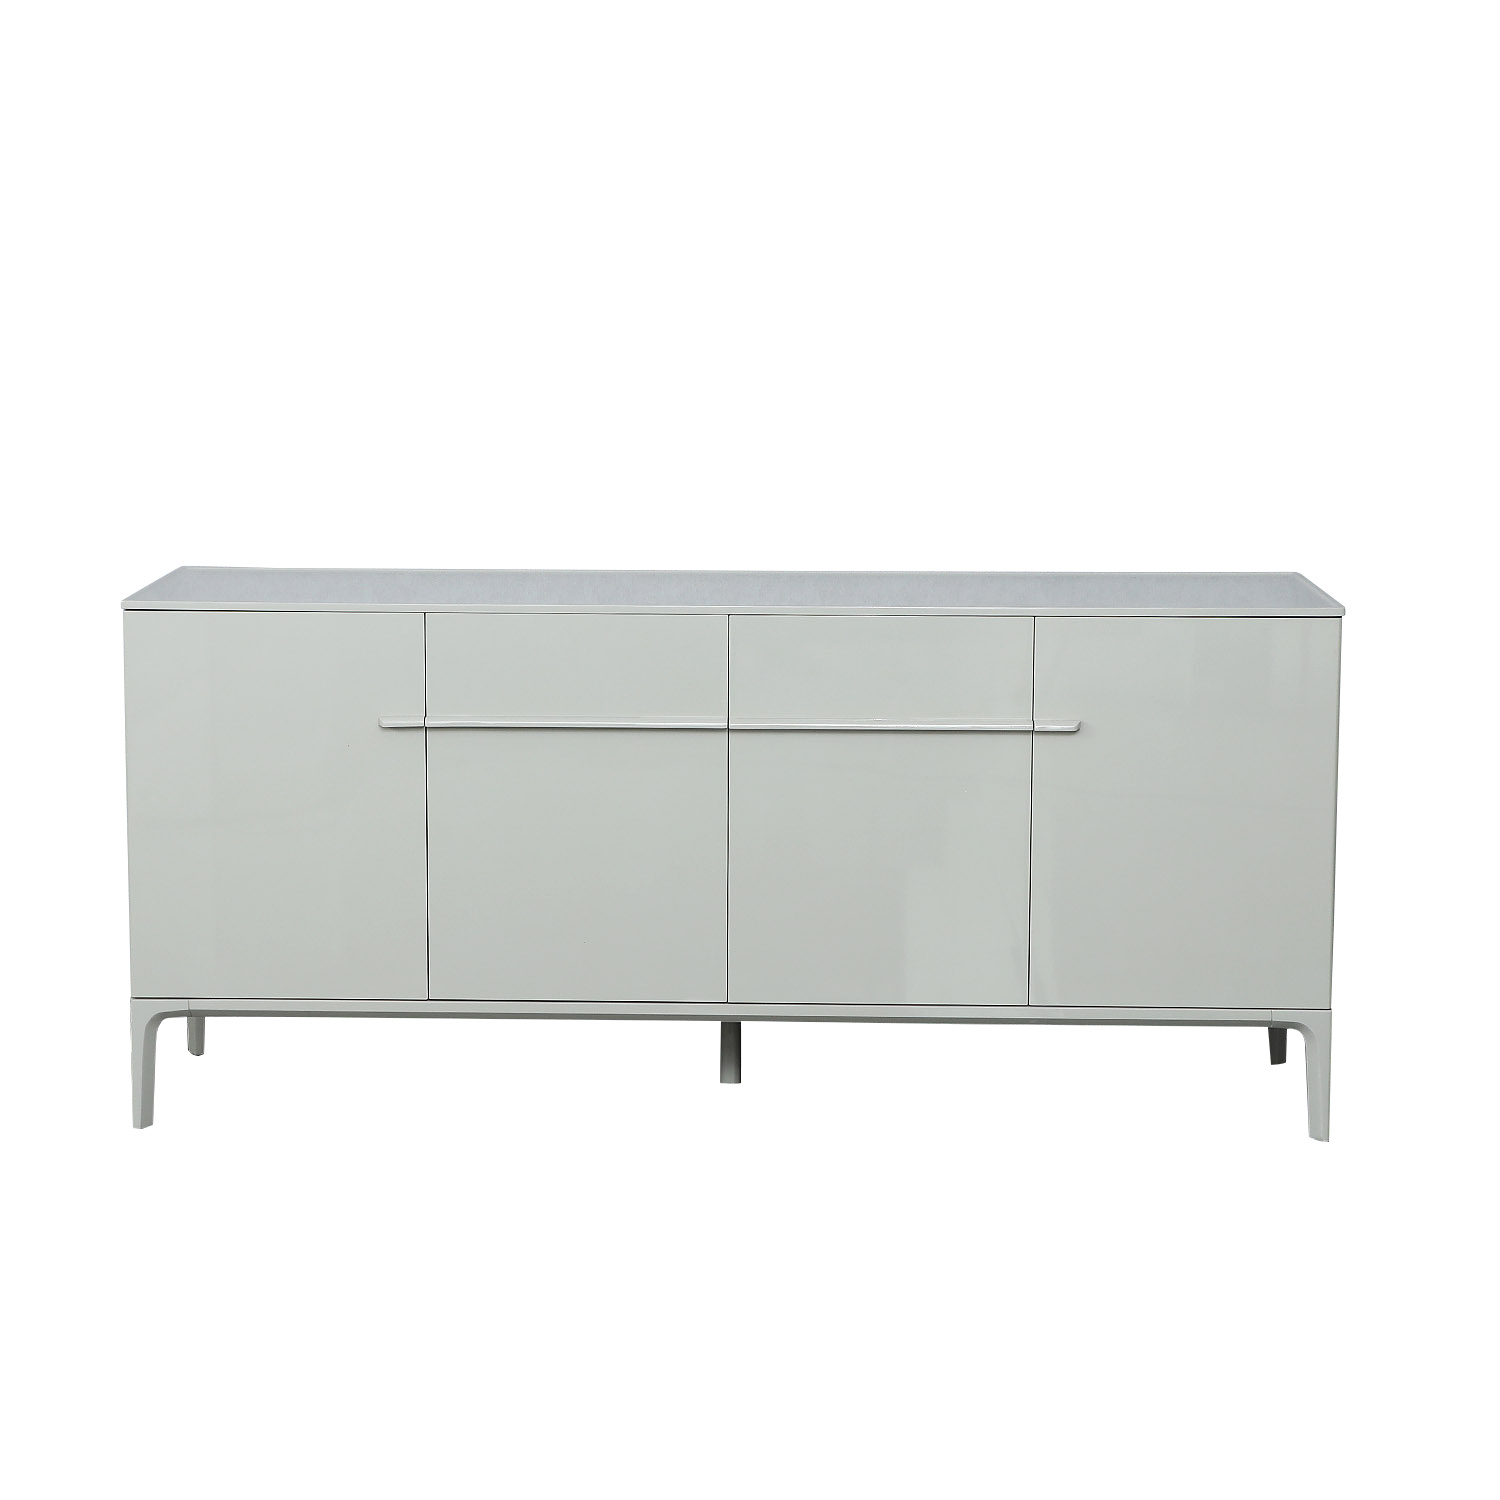 Nordic Style High Quality Solid Wood Sideboard Storage Cabinet Home Hotel Living Room Furniture